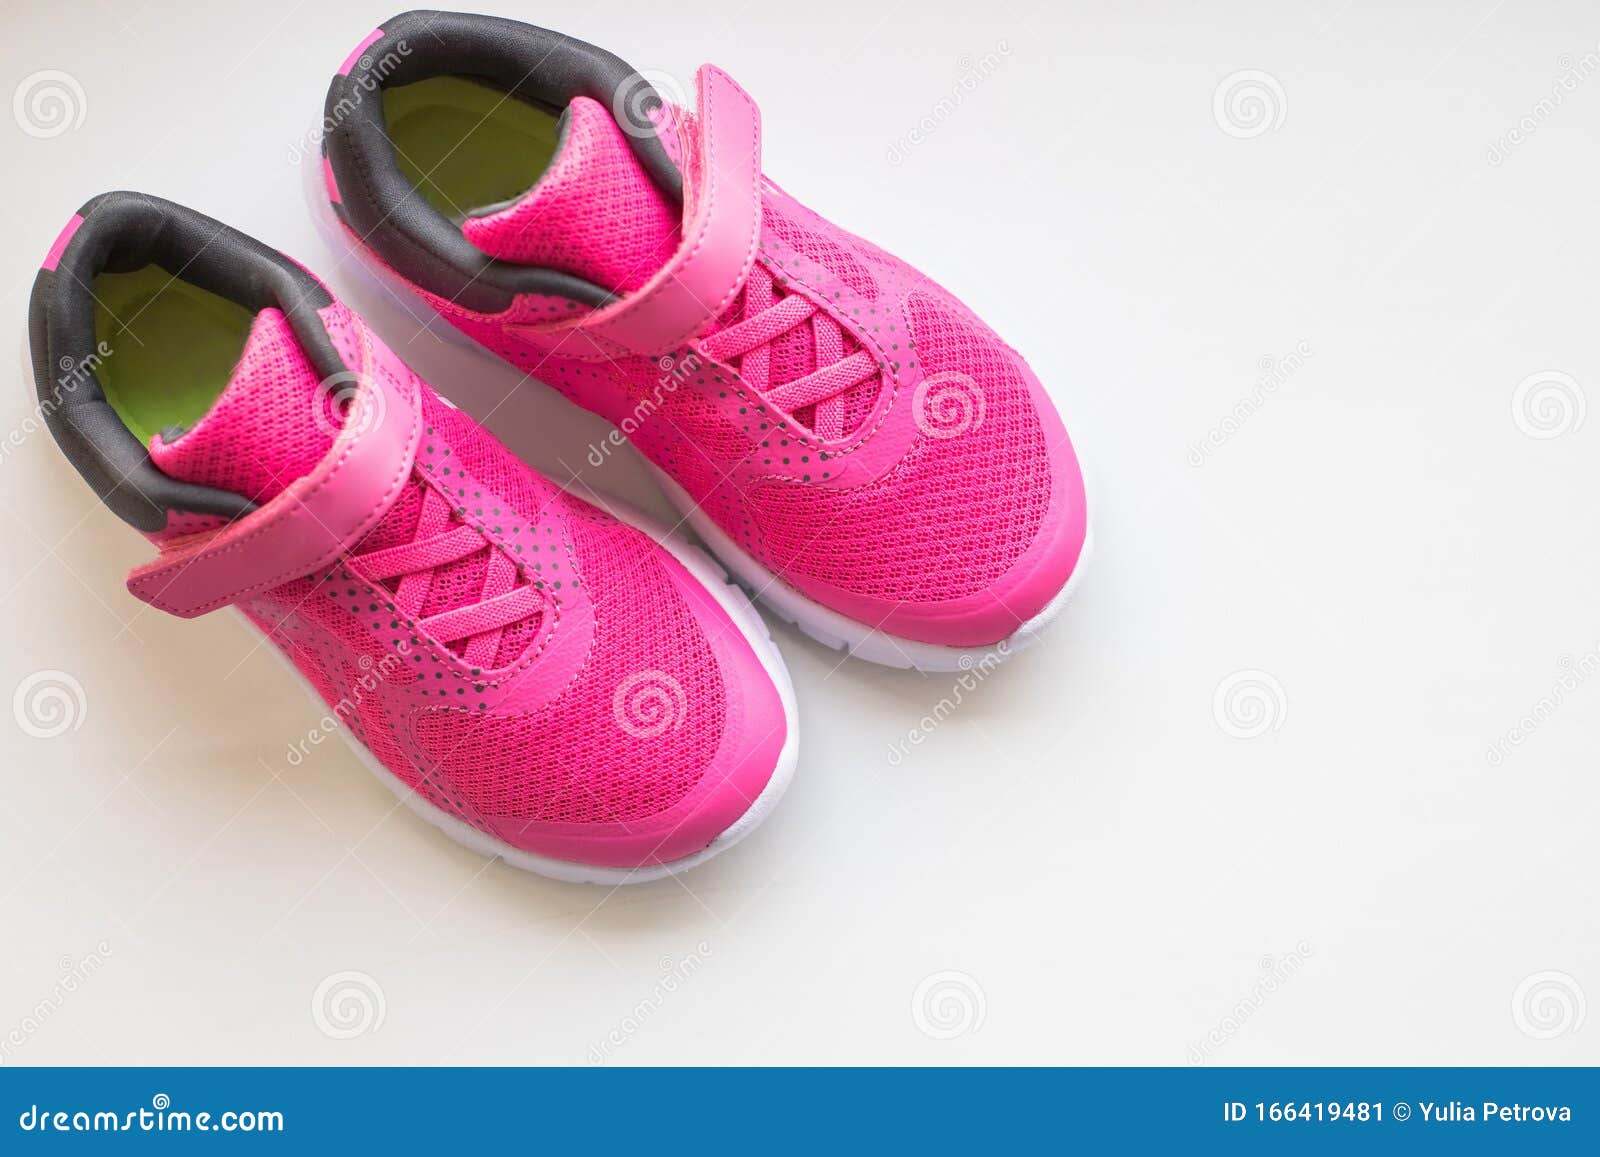 Modern Pinky Sport Shoes .Pair of Sport Shoes on Colorful Background ...